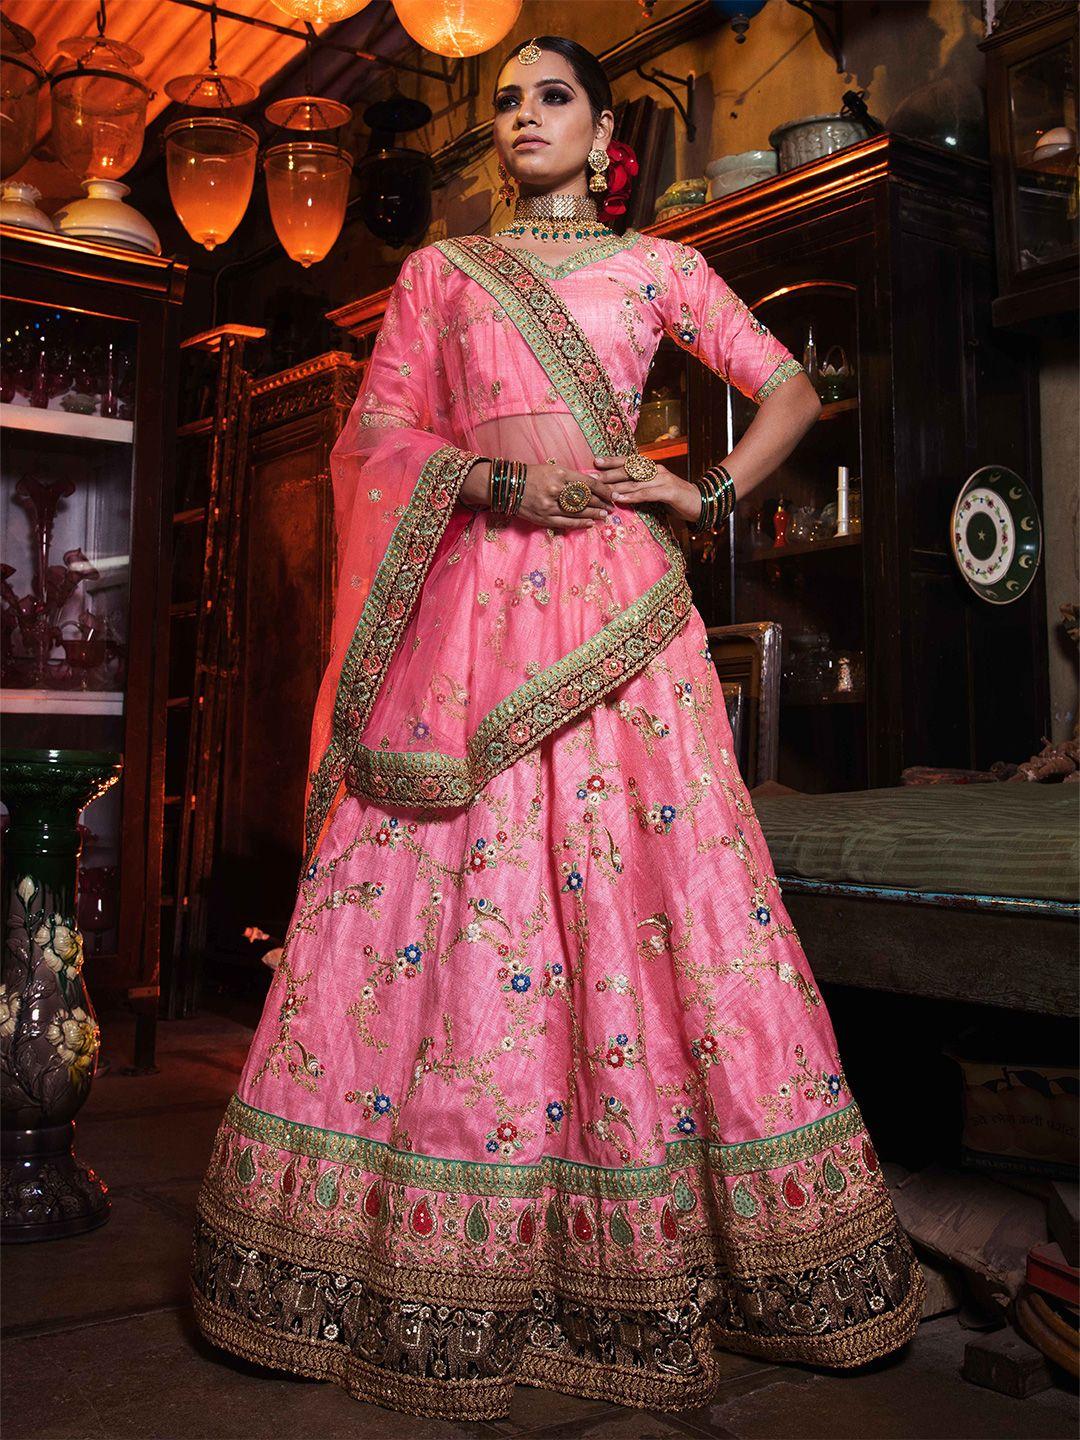 zeel clothing embroidered sequinned semi-stitched lehenga & unstitched blouse with dupatta